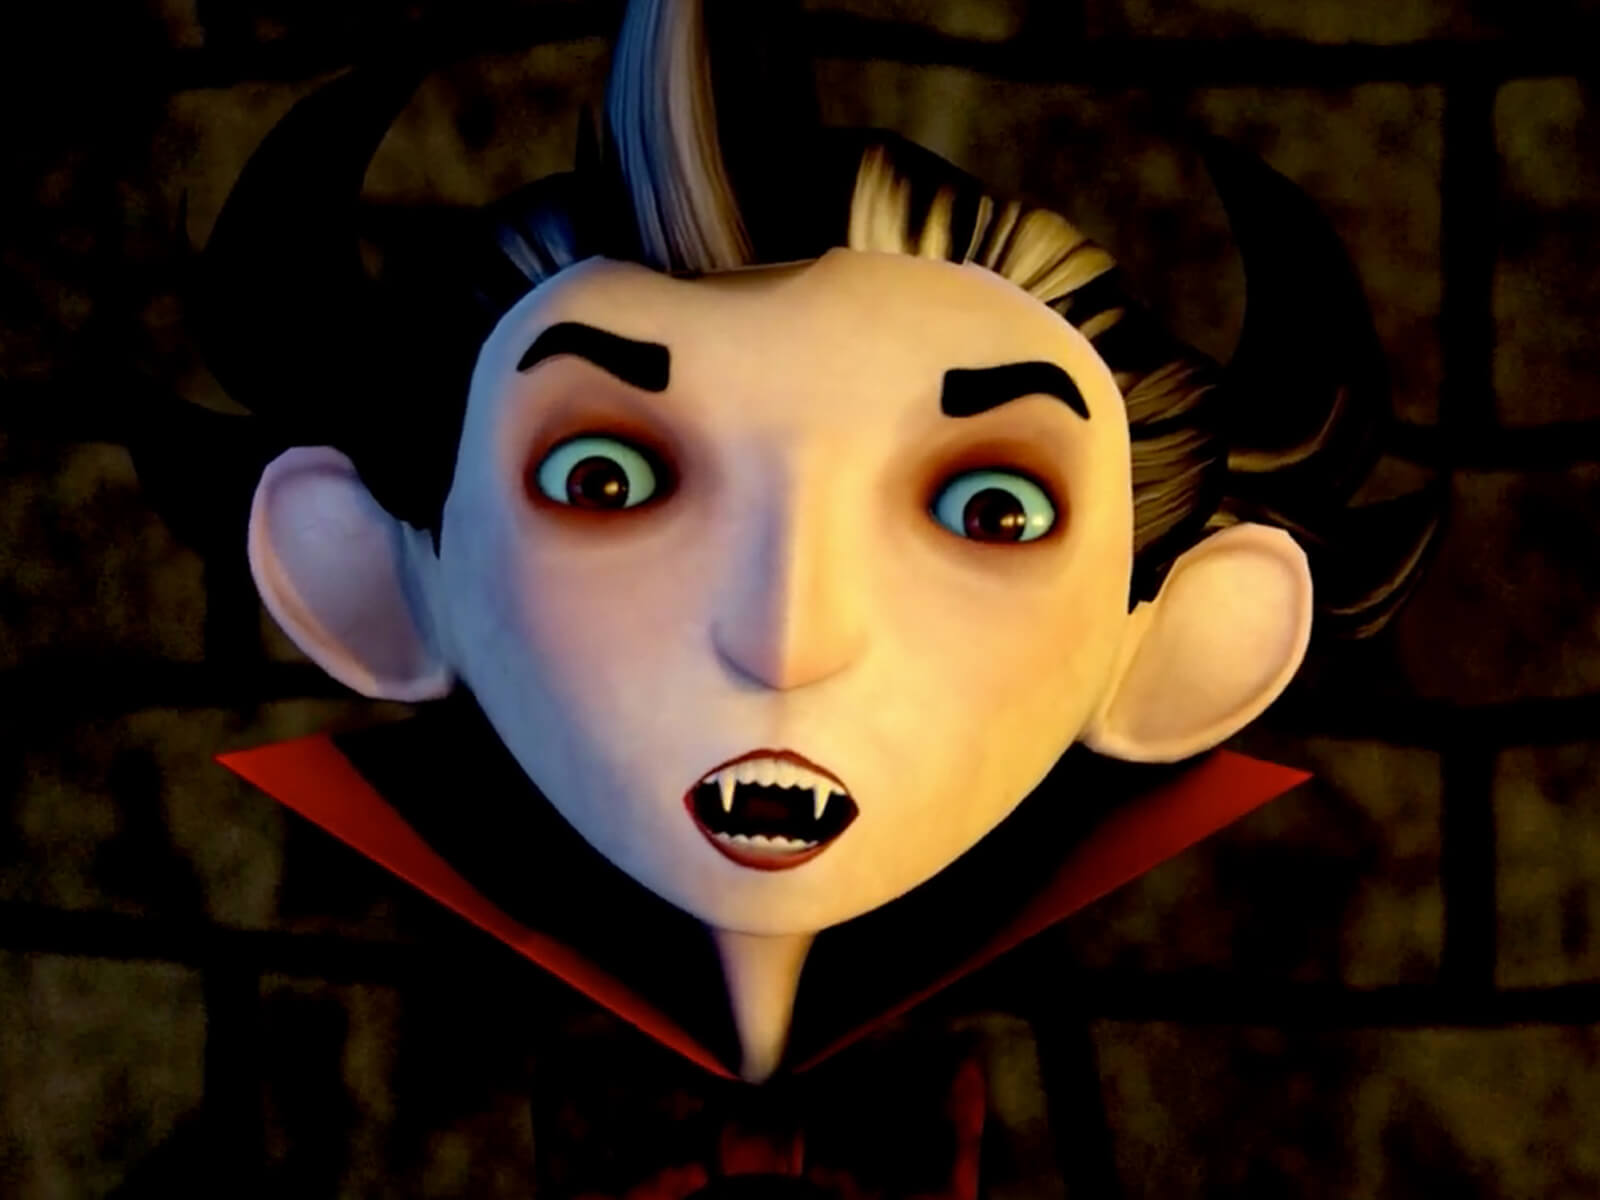 Close-up shot of a 3D animated vampire with a pale face, fangs, and red collar